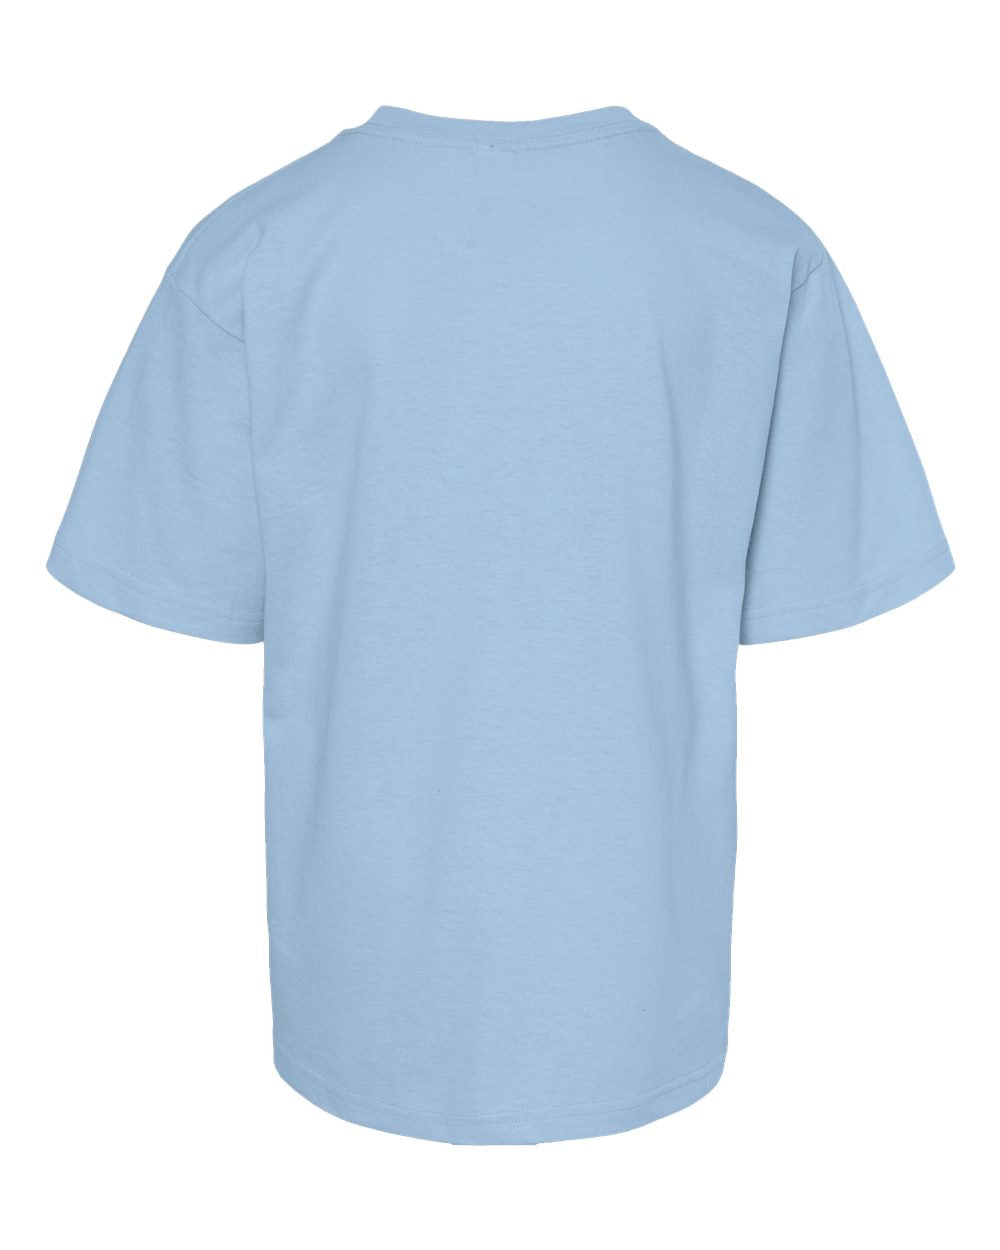 M&O Youth Gold Soft Touch T-Shirt 4850 #color_Light Blue